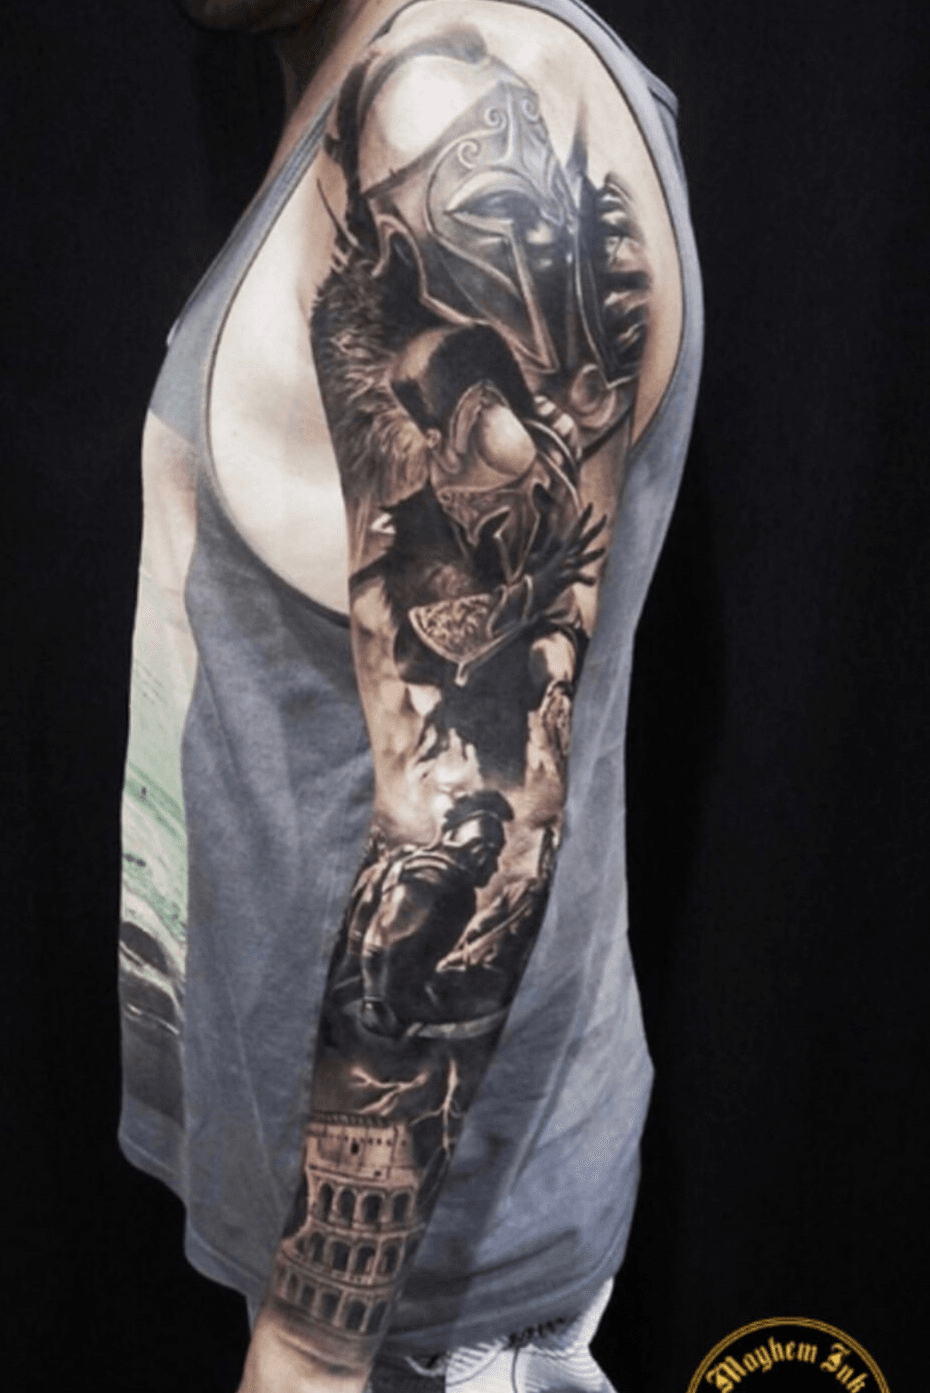 10 Best Japanese Full Sleeve Tattoo IdeasCollected By Daily Hind News   Daily Hind News